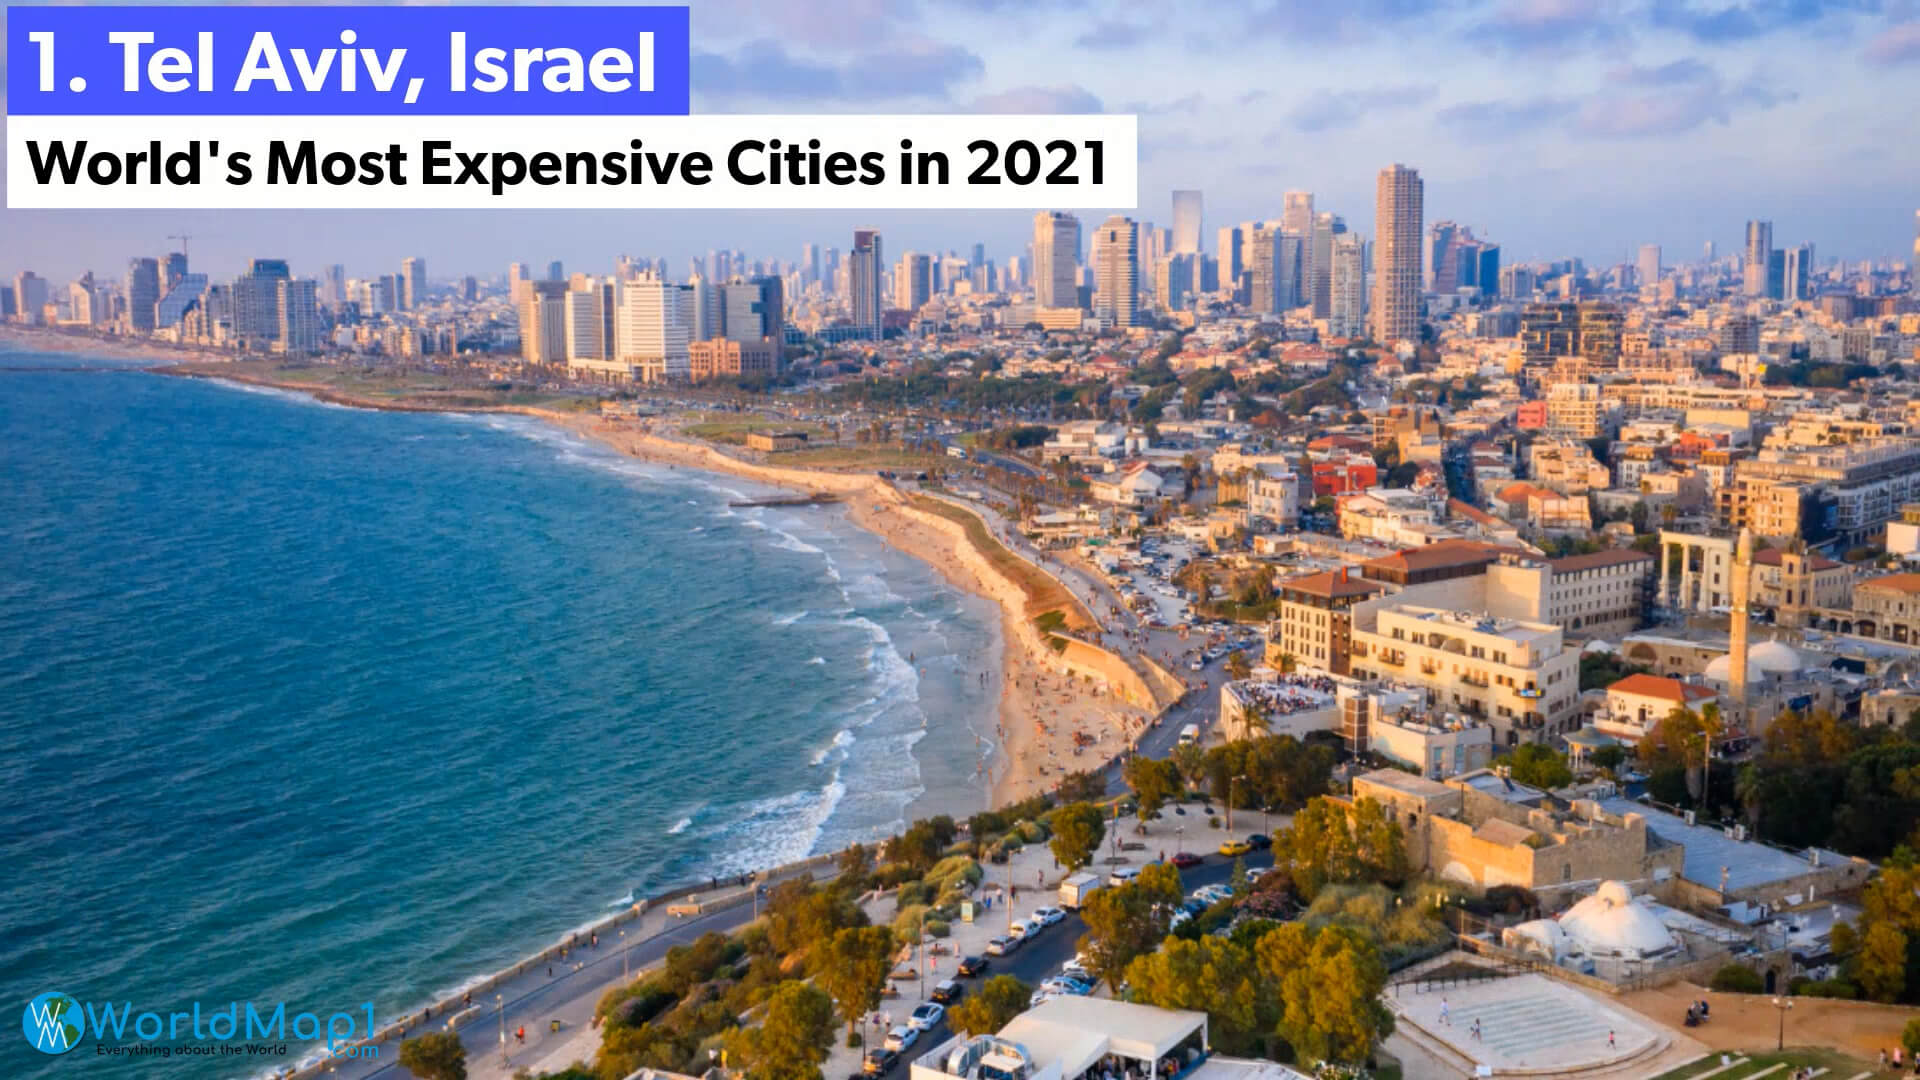 World's Most Expensive Cities - Tel Aviv, Israel